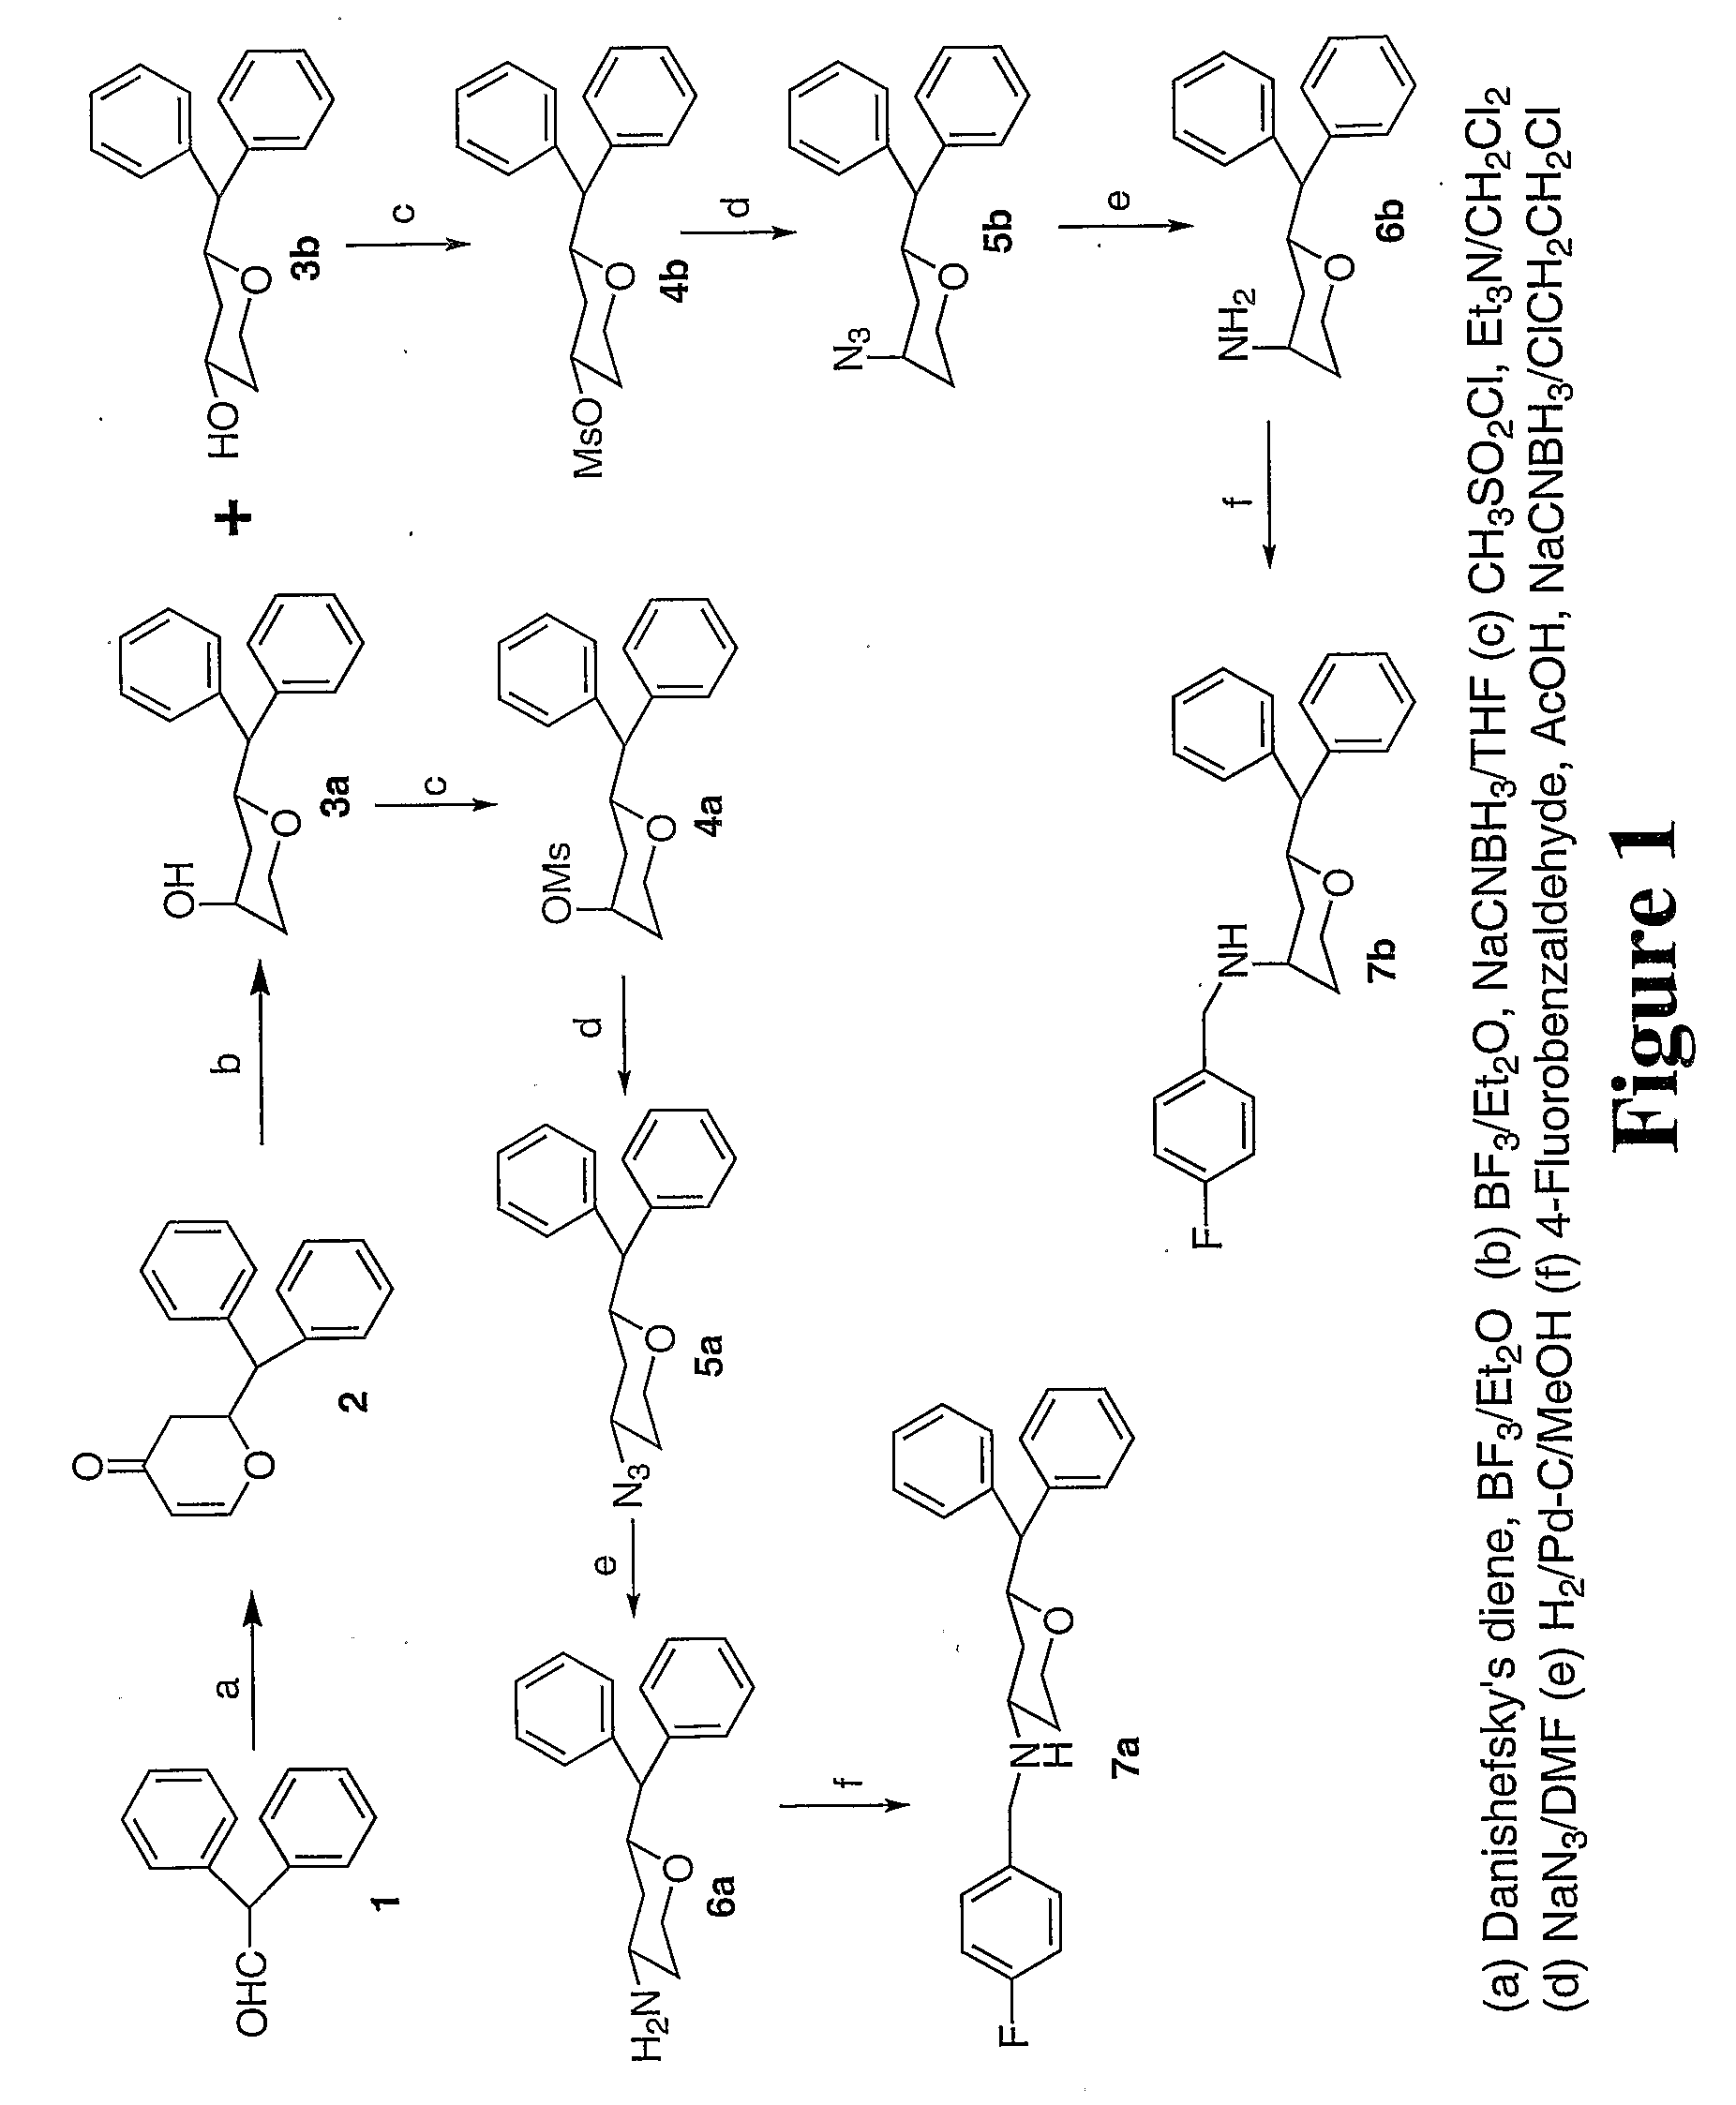 Tri-substitued 2-benzhydryl 5-benzlamino-tetrahydro-pyran-4-ol and 6-benzhydryl-4-benzylamino-tetrahydro-pyran-3-ol analogues, and novel 3,6 disubstituted pyran derivatives